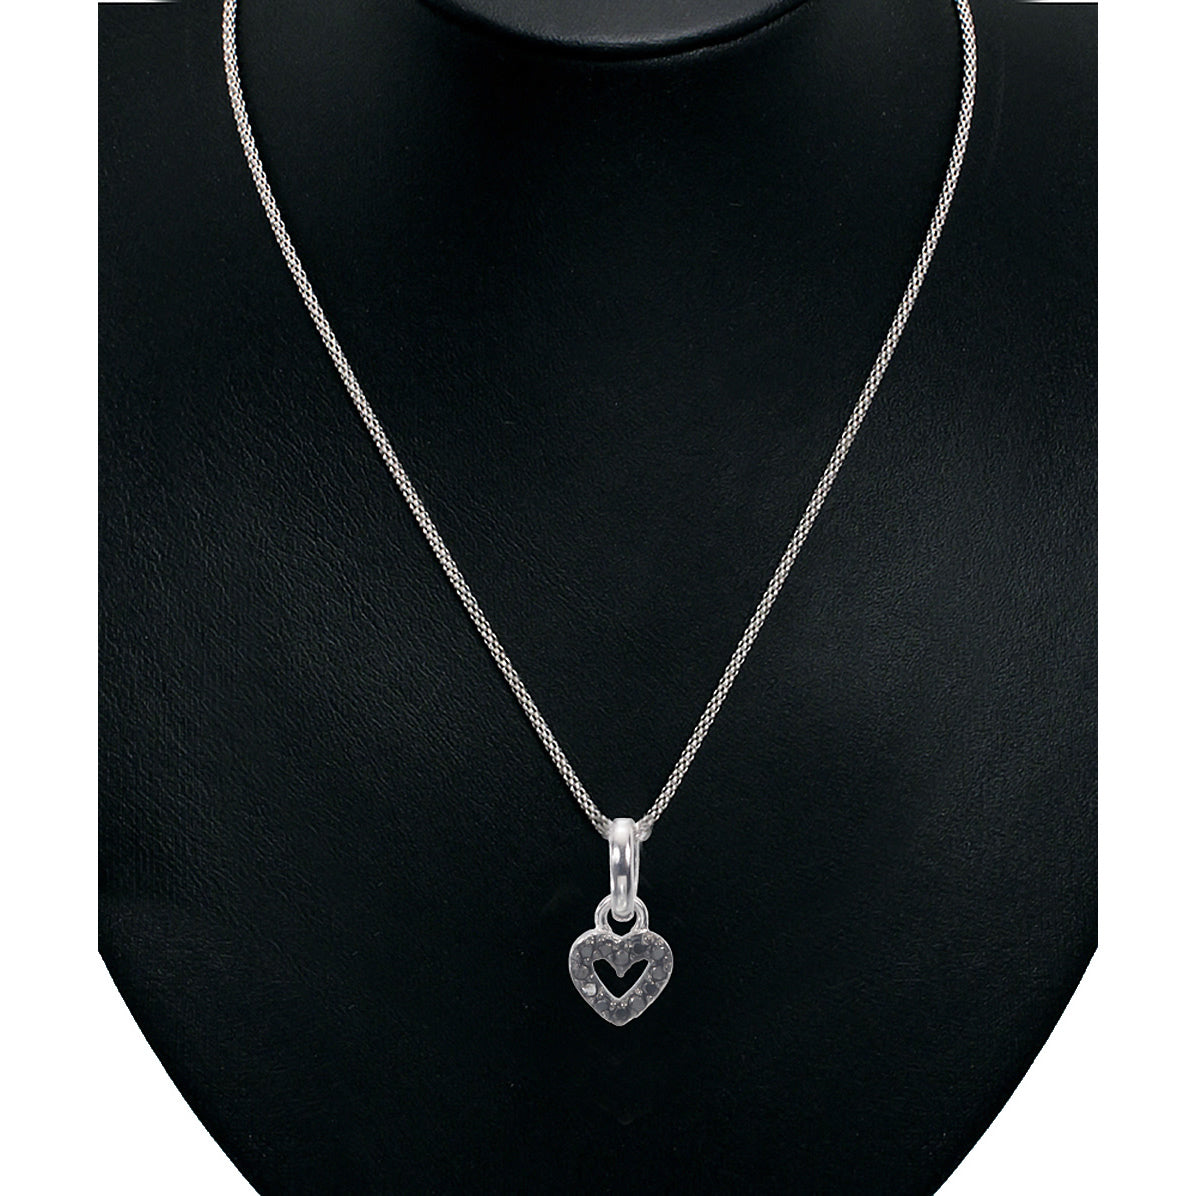 1/10 cttw Black Diamond Pendant Necklace .925 Sterling Silver With Rhodium